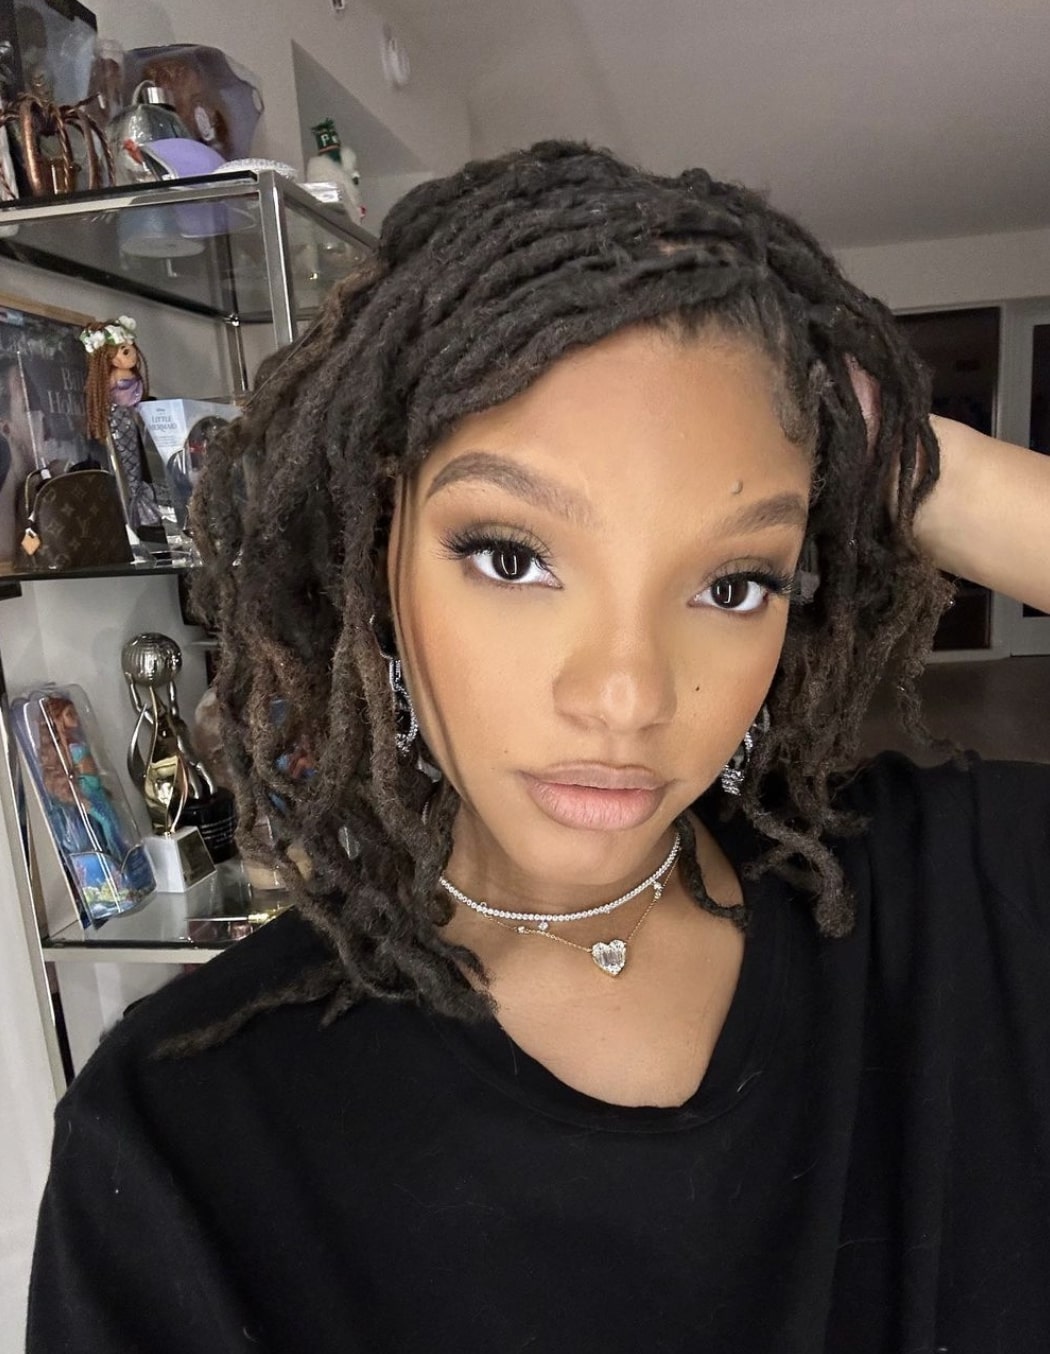 halle-bailey-reacts-to-fan-who-says-she-has-a-‘pregnancy-nose’